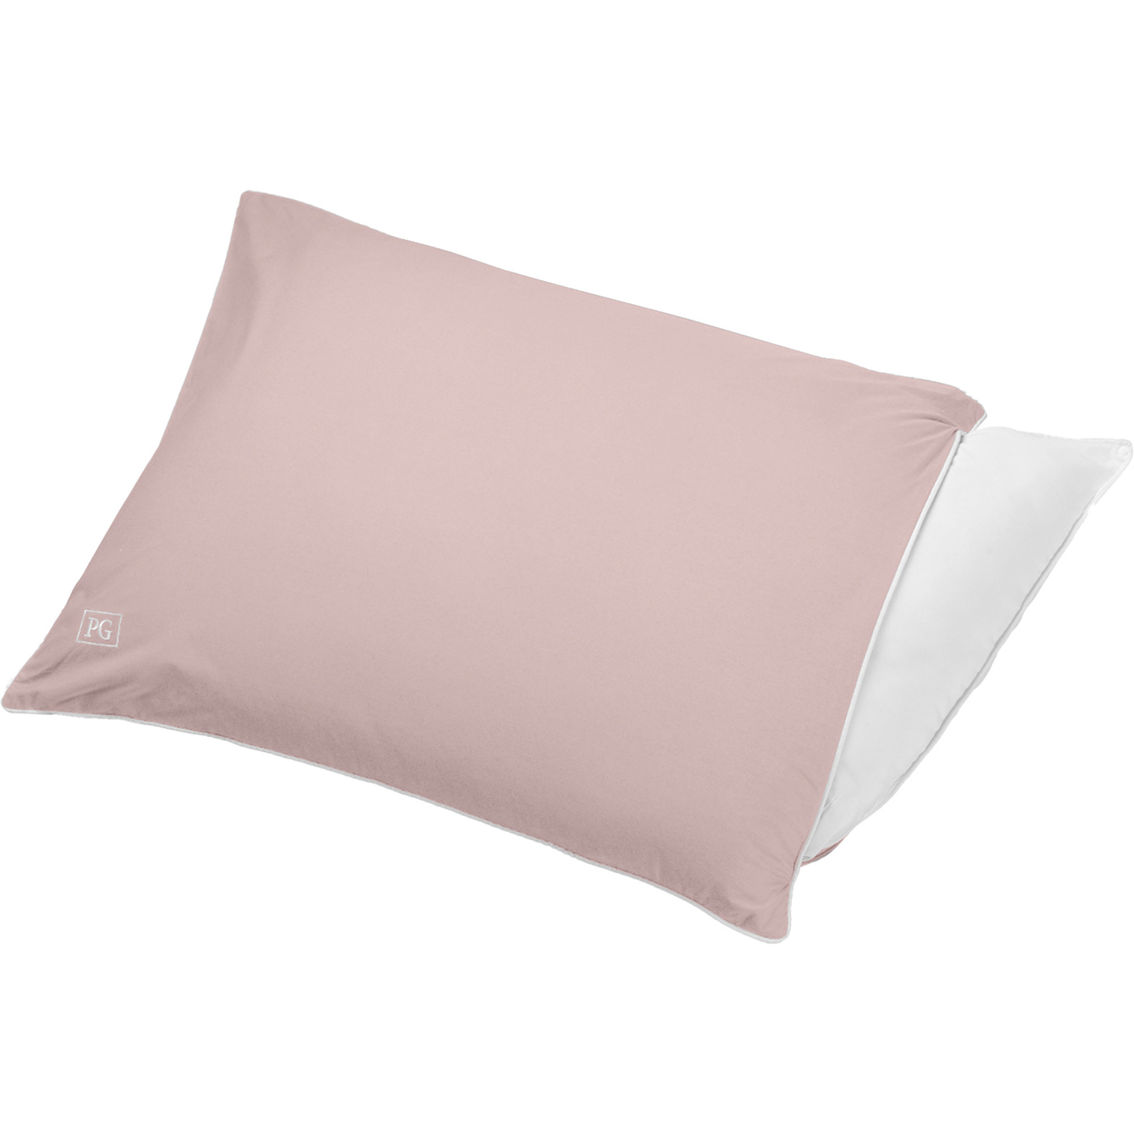 Pillow Gal Soft Down Alternative Pillow with Removable Pillow Protector - Image 2 of 4